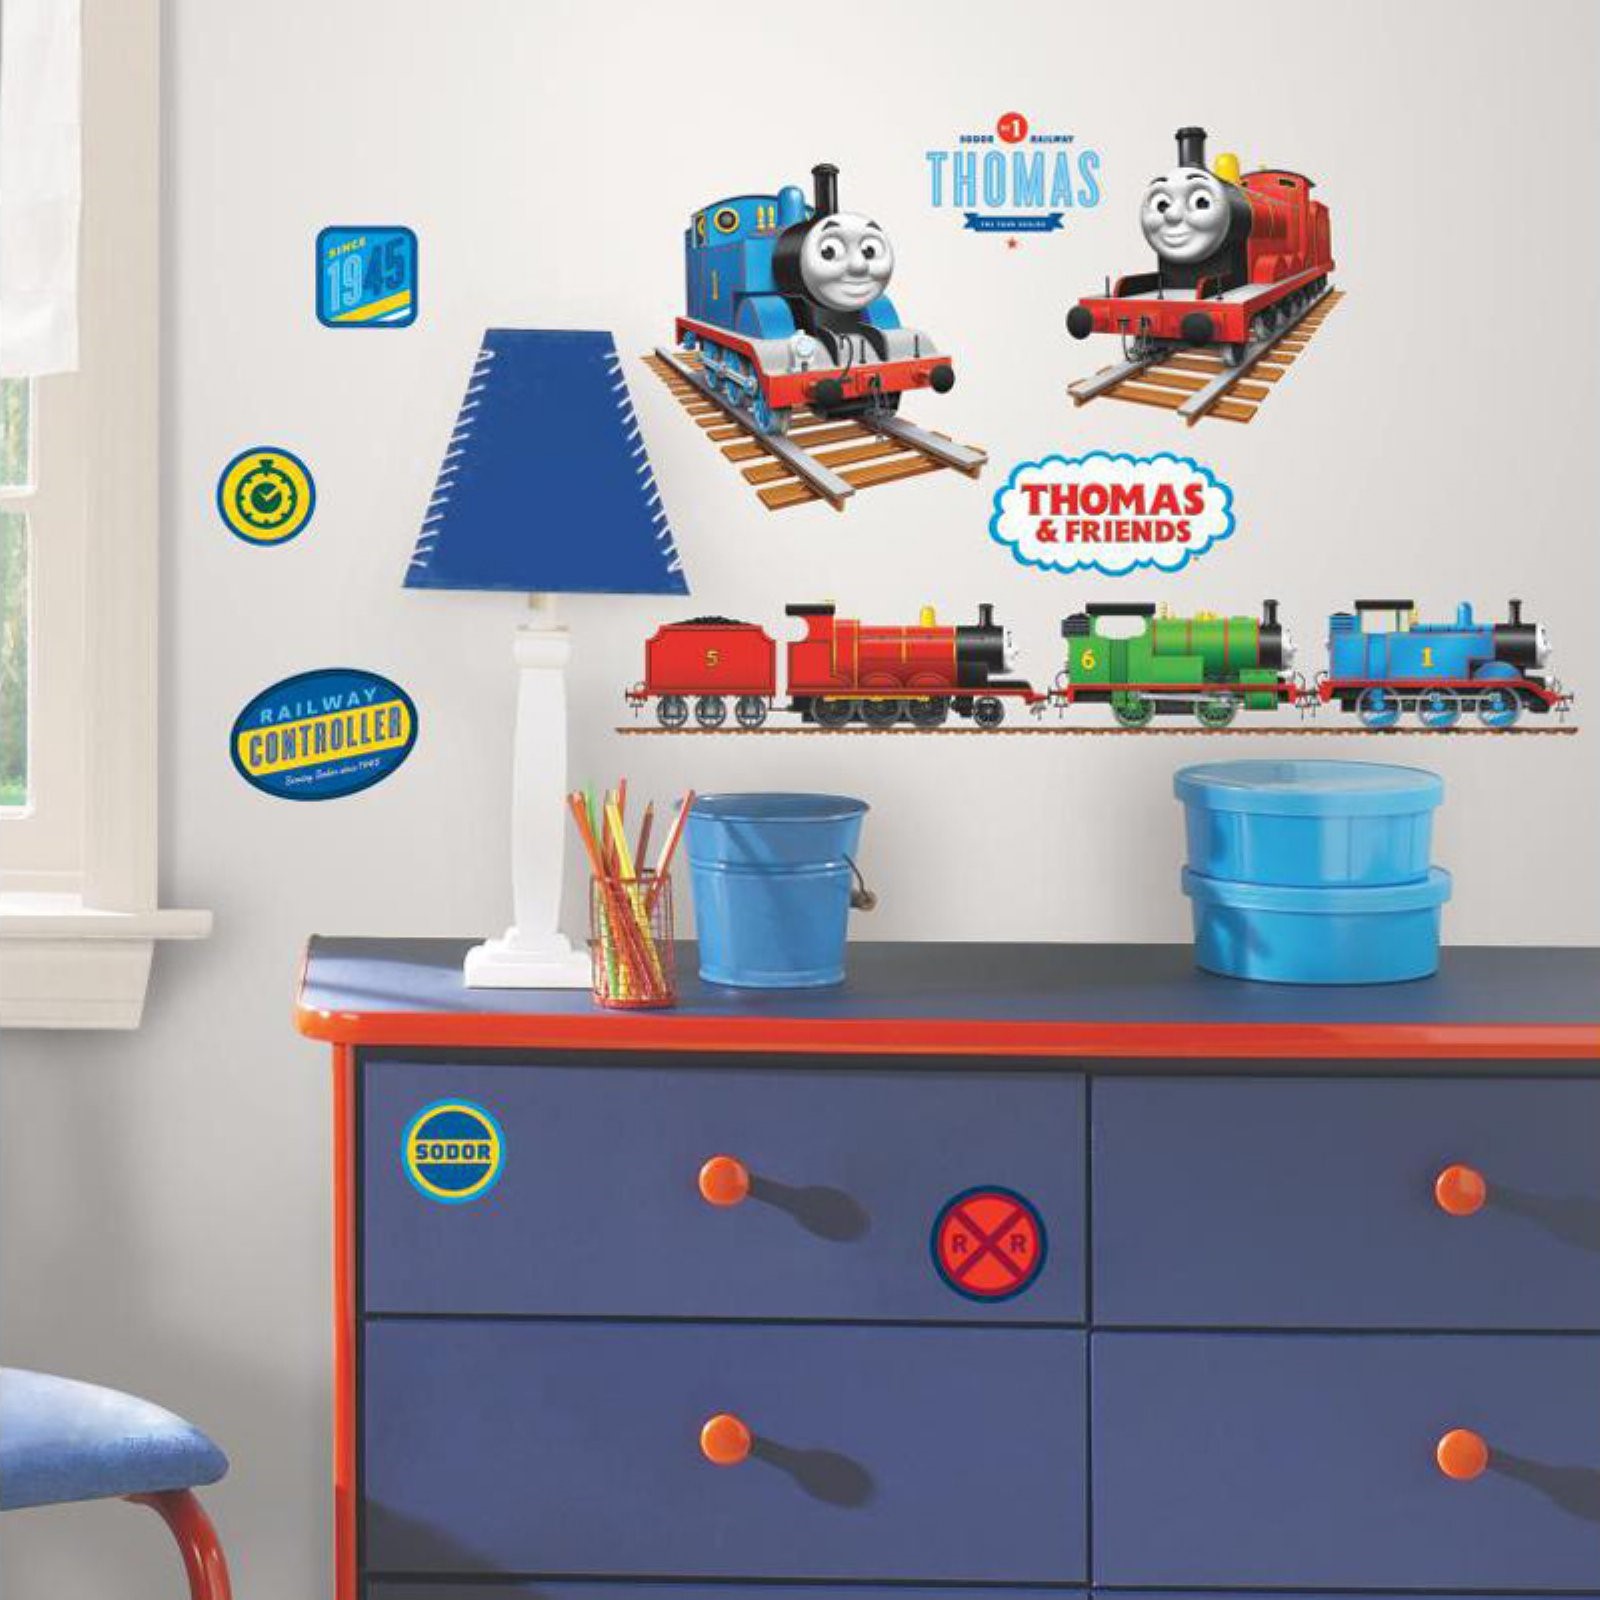 Thomas the Tank Engine Wall Decals - image 2 of 3